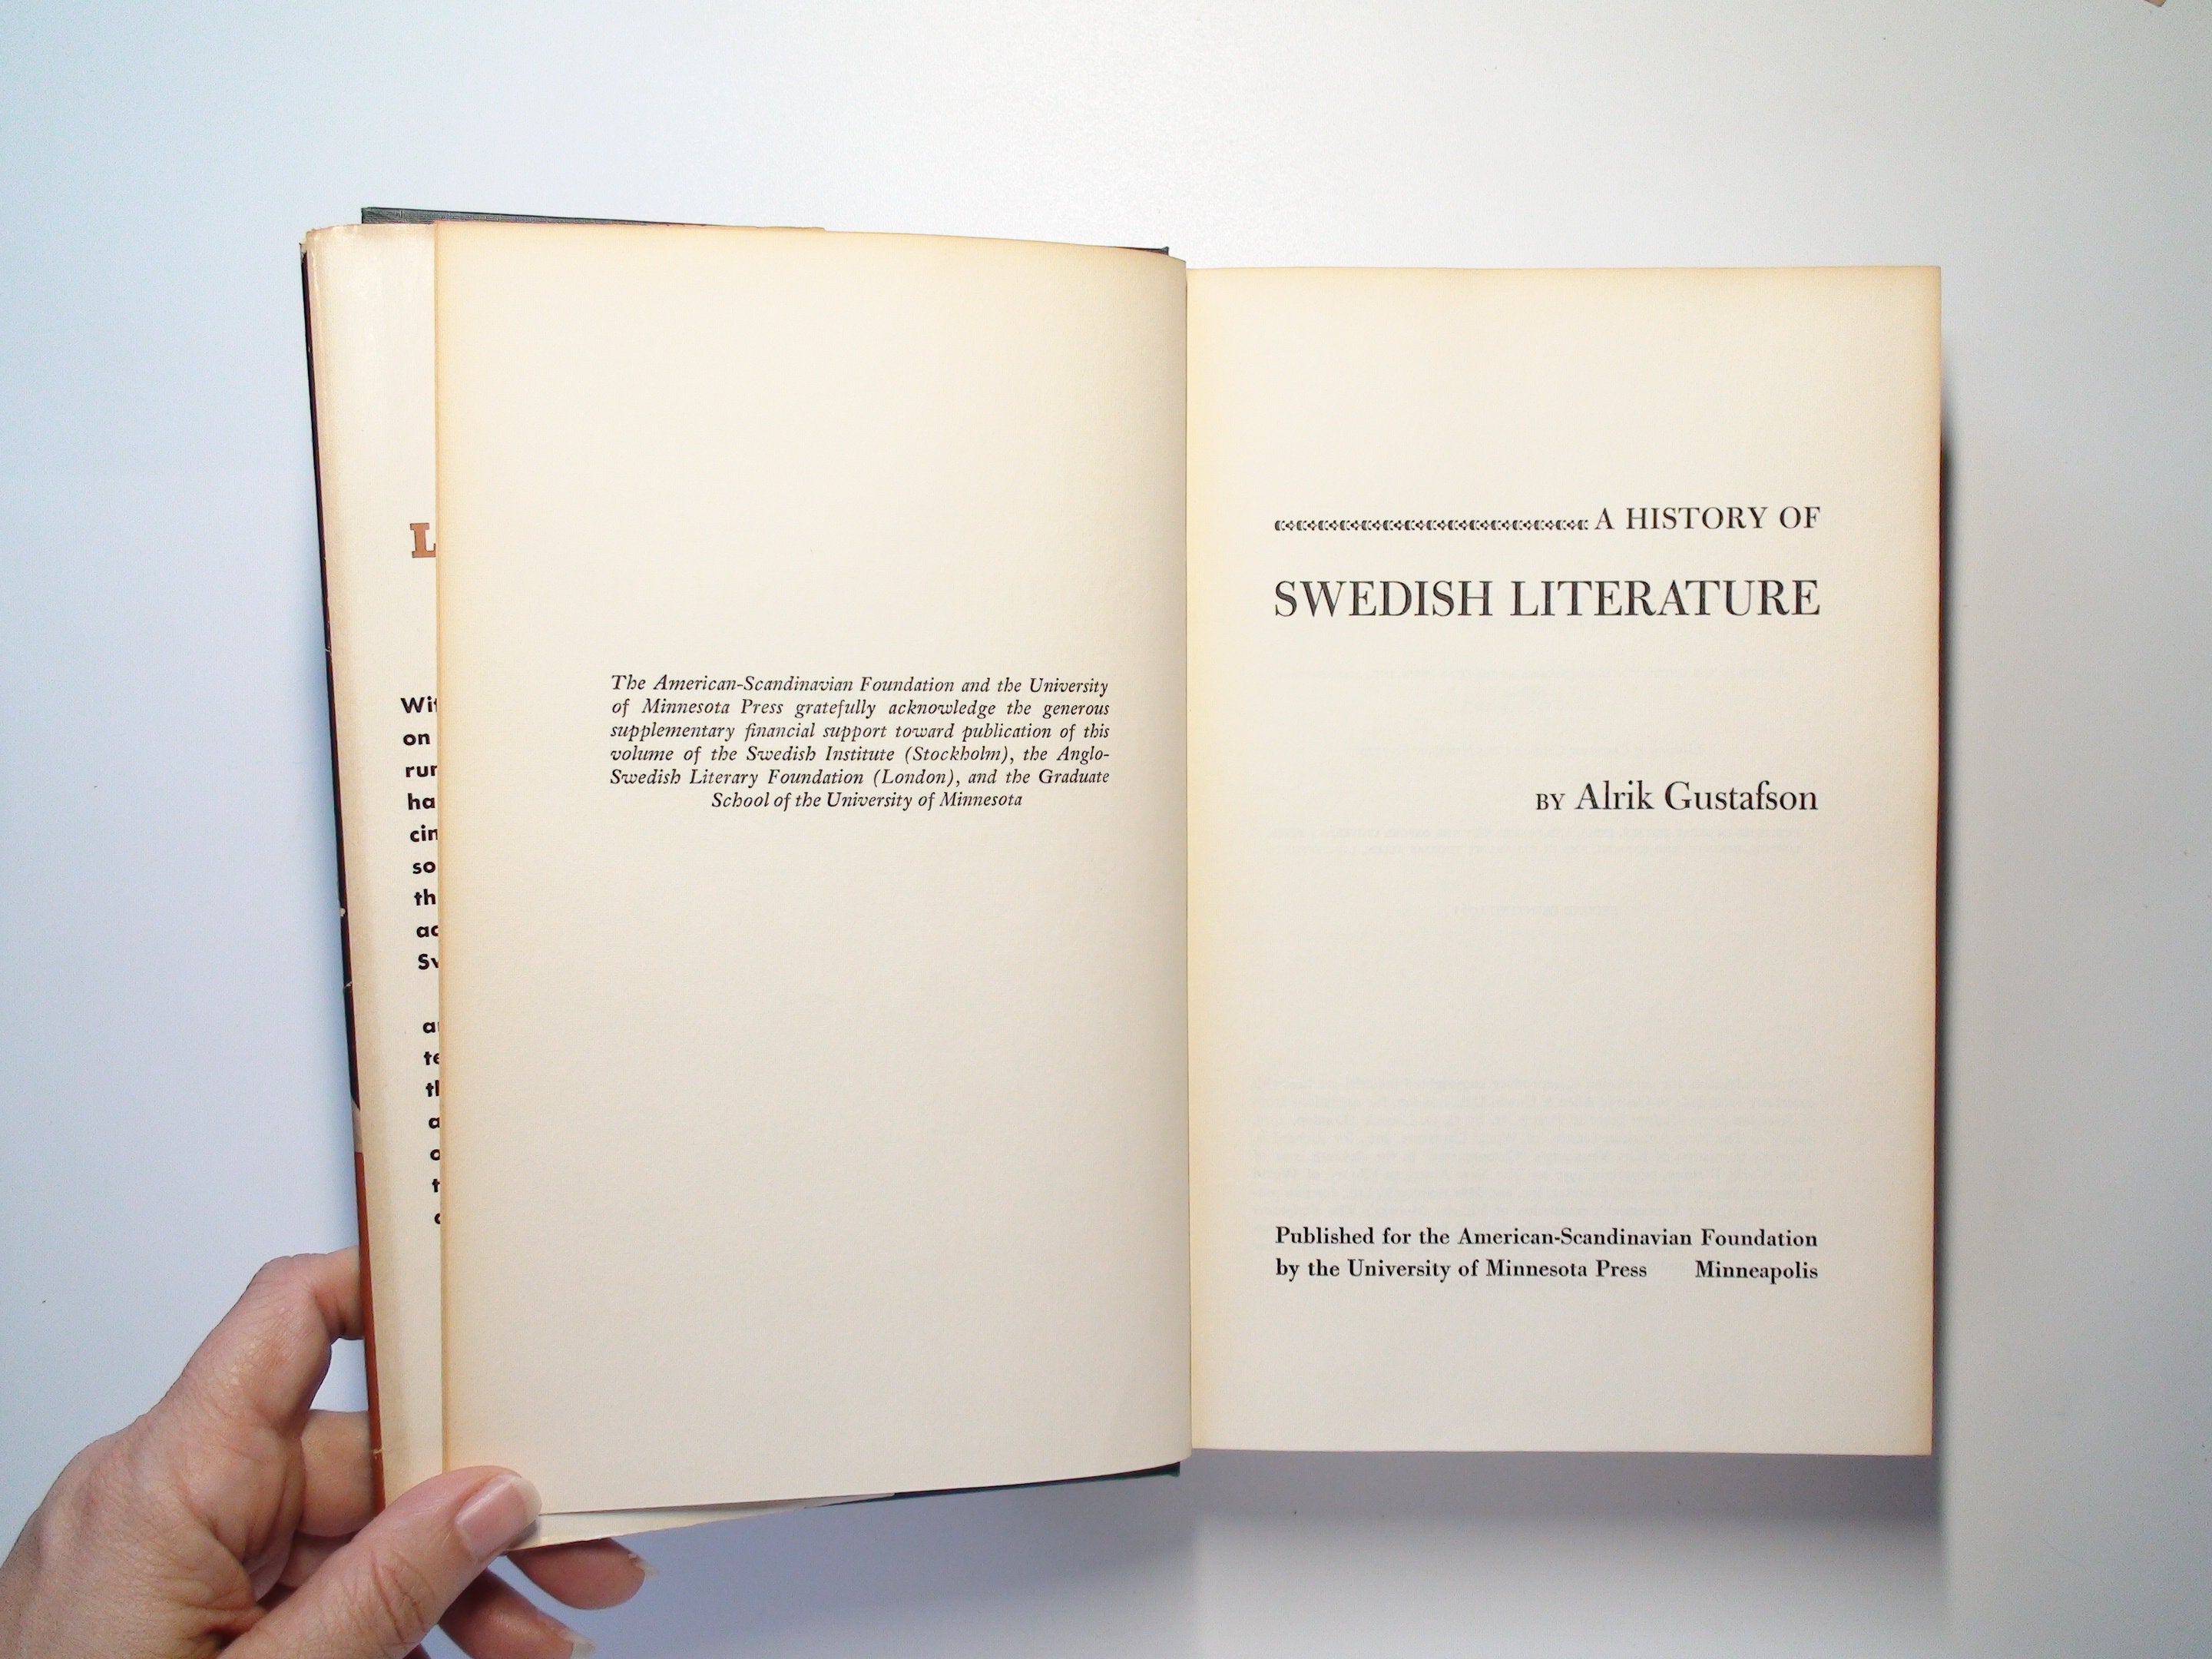 A History of Swedish Literature, by Alrik Gustafson, Illustrated, 1961